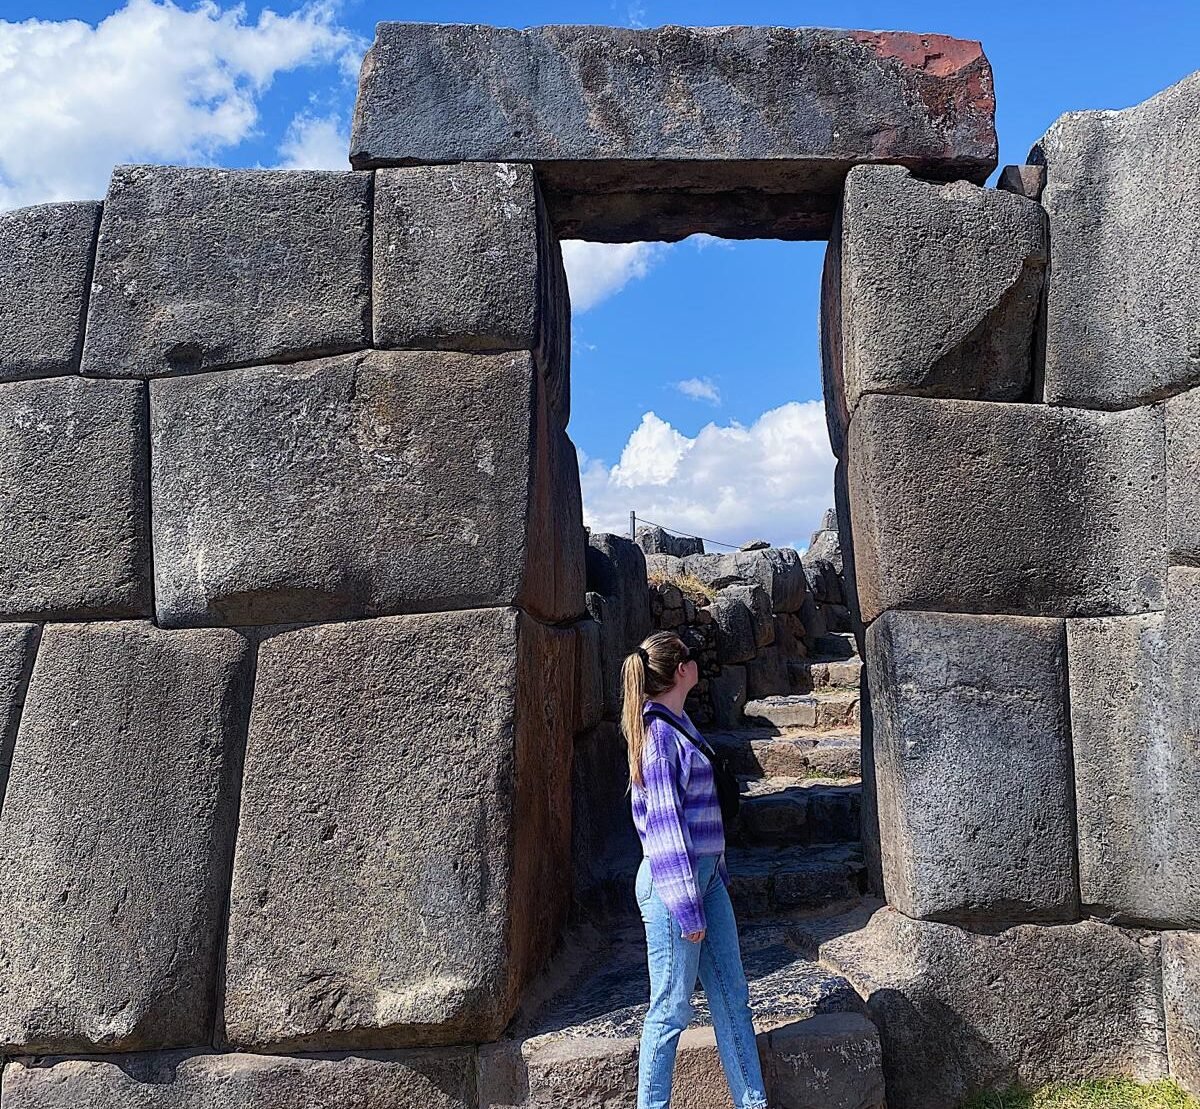 7-day itinerary to discover the Sacred Valley of the Incas. From Cusco to Machu Picchu